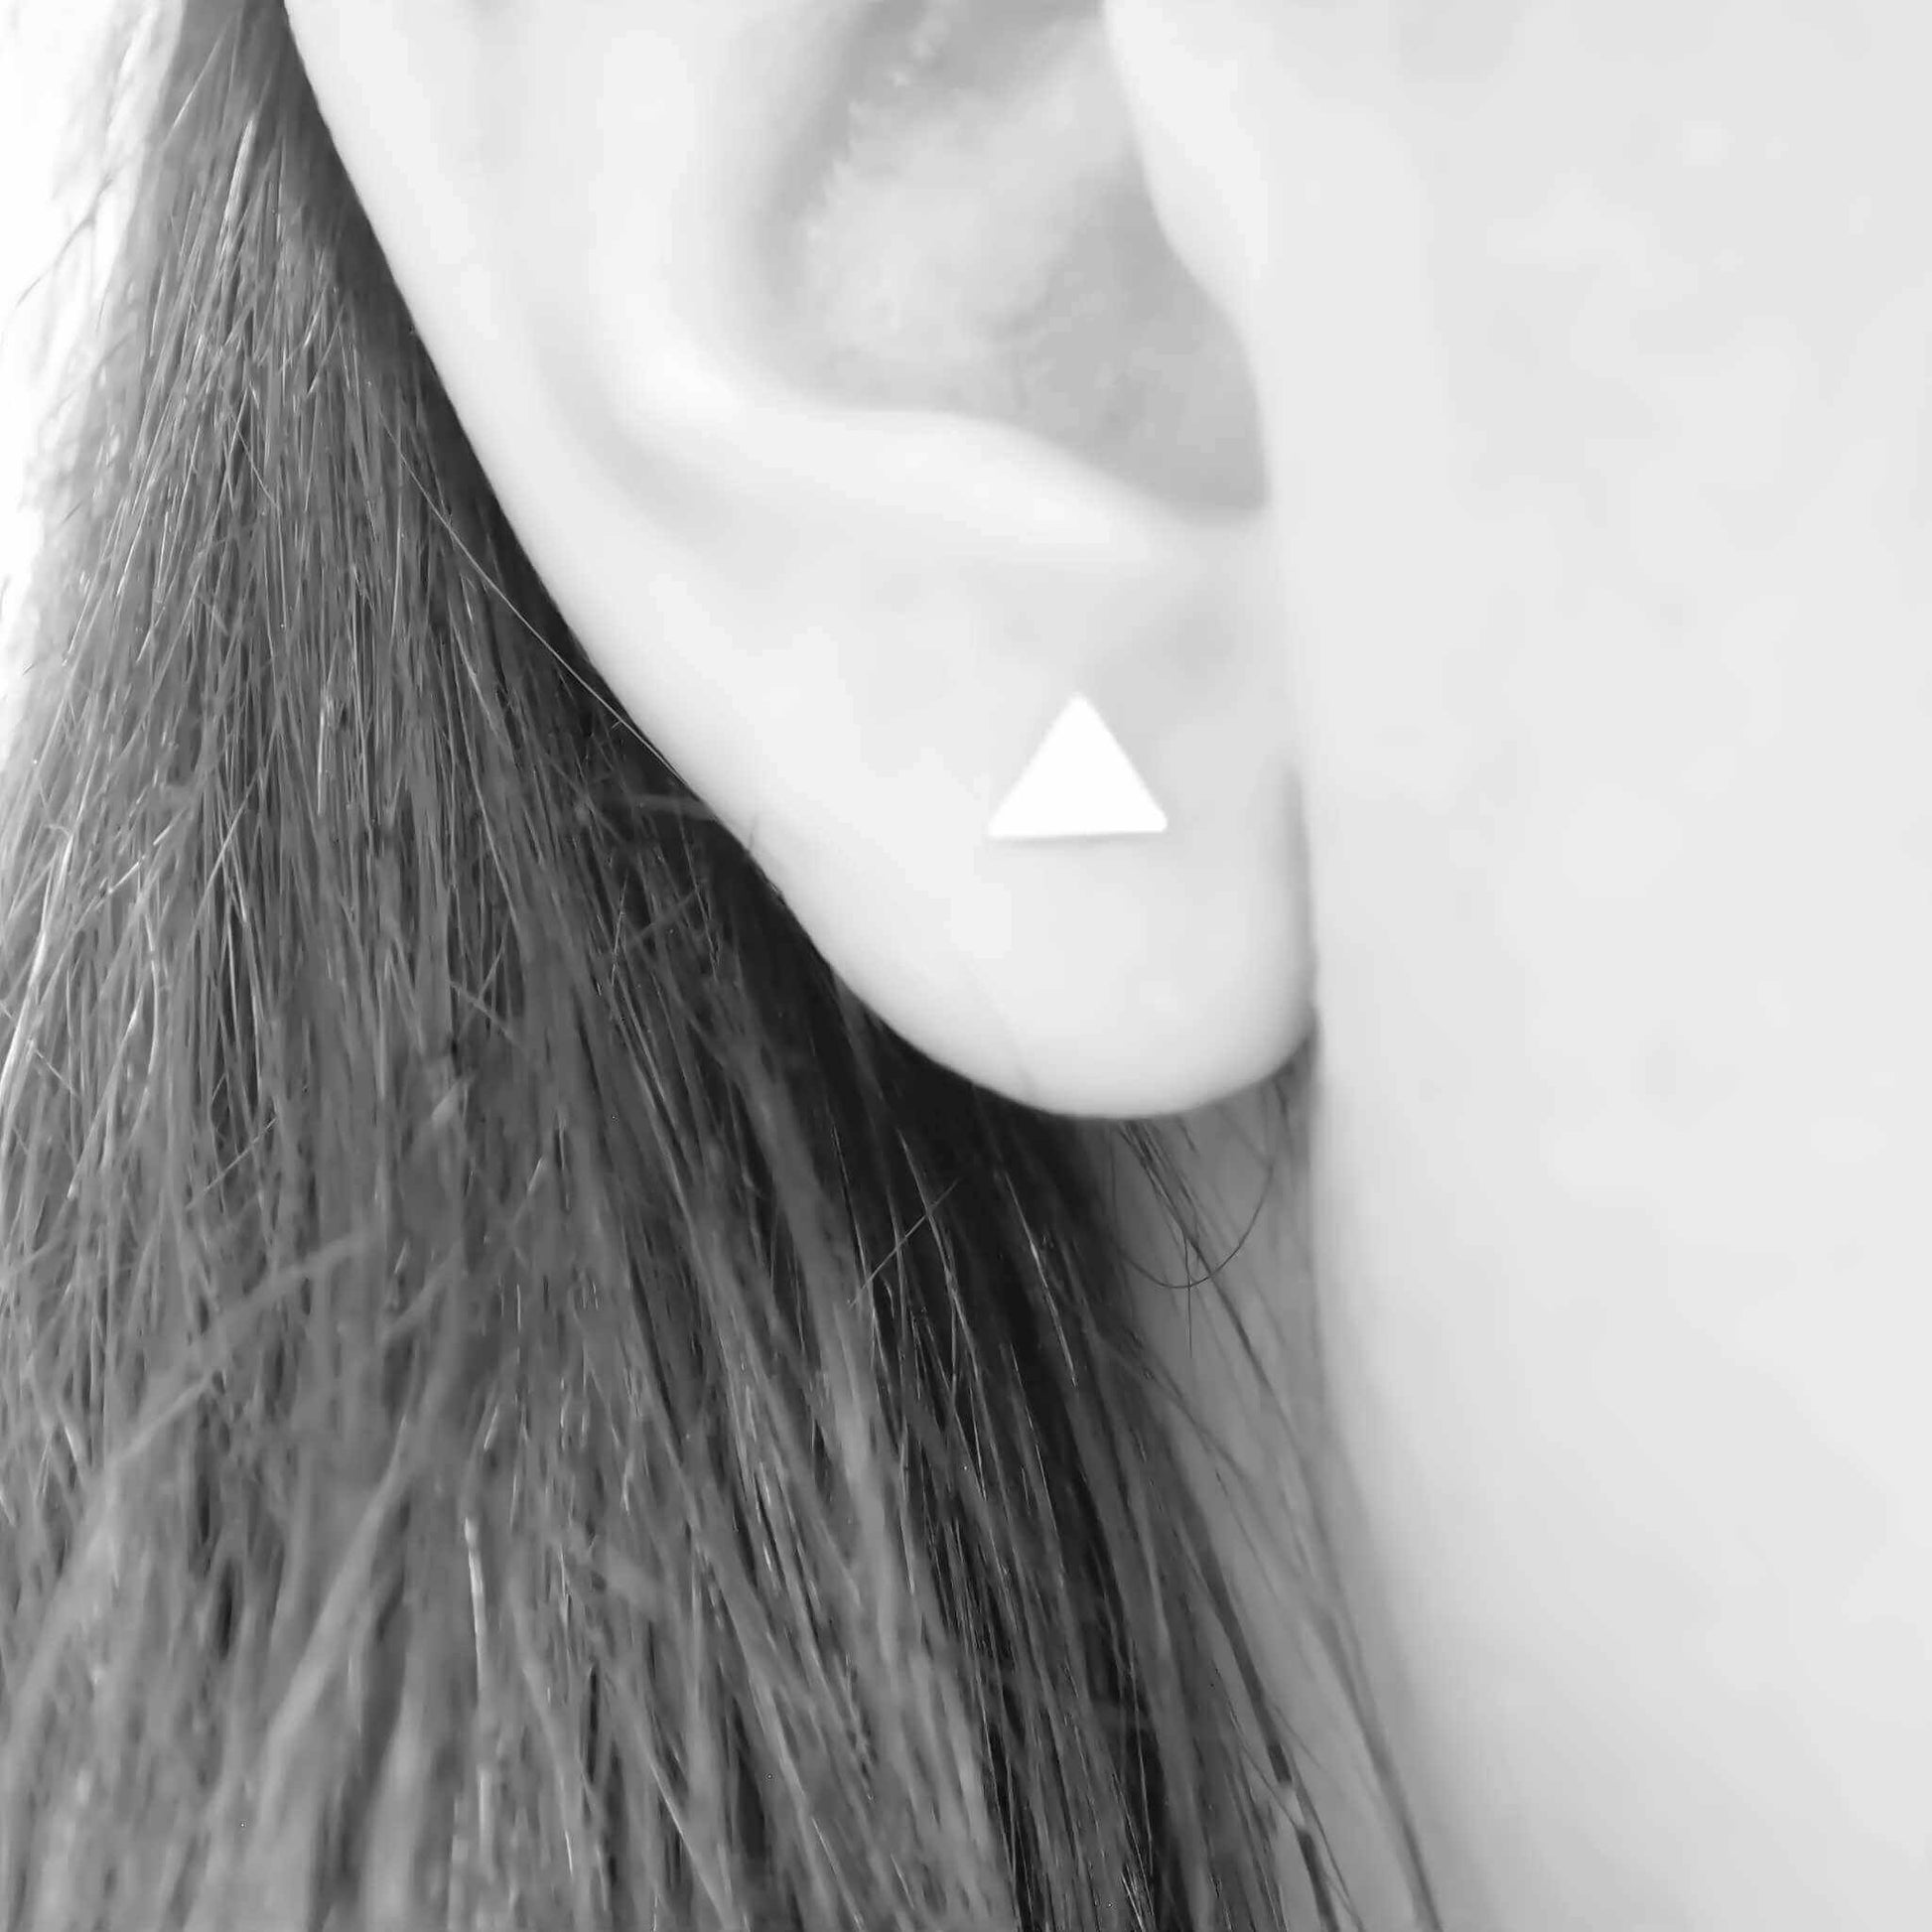 Black and white close up image of an ear with a single piercing showing a small triangle stud. Earrings handmade in Scotland by maram jewellery